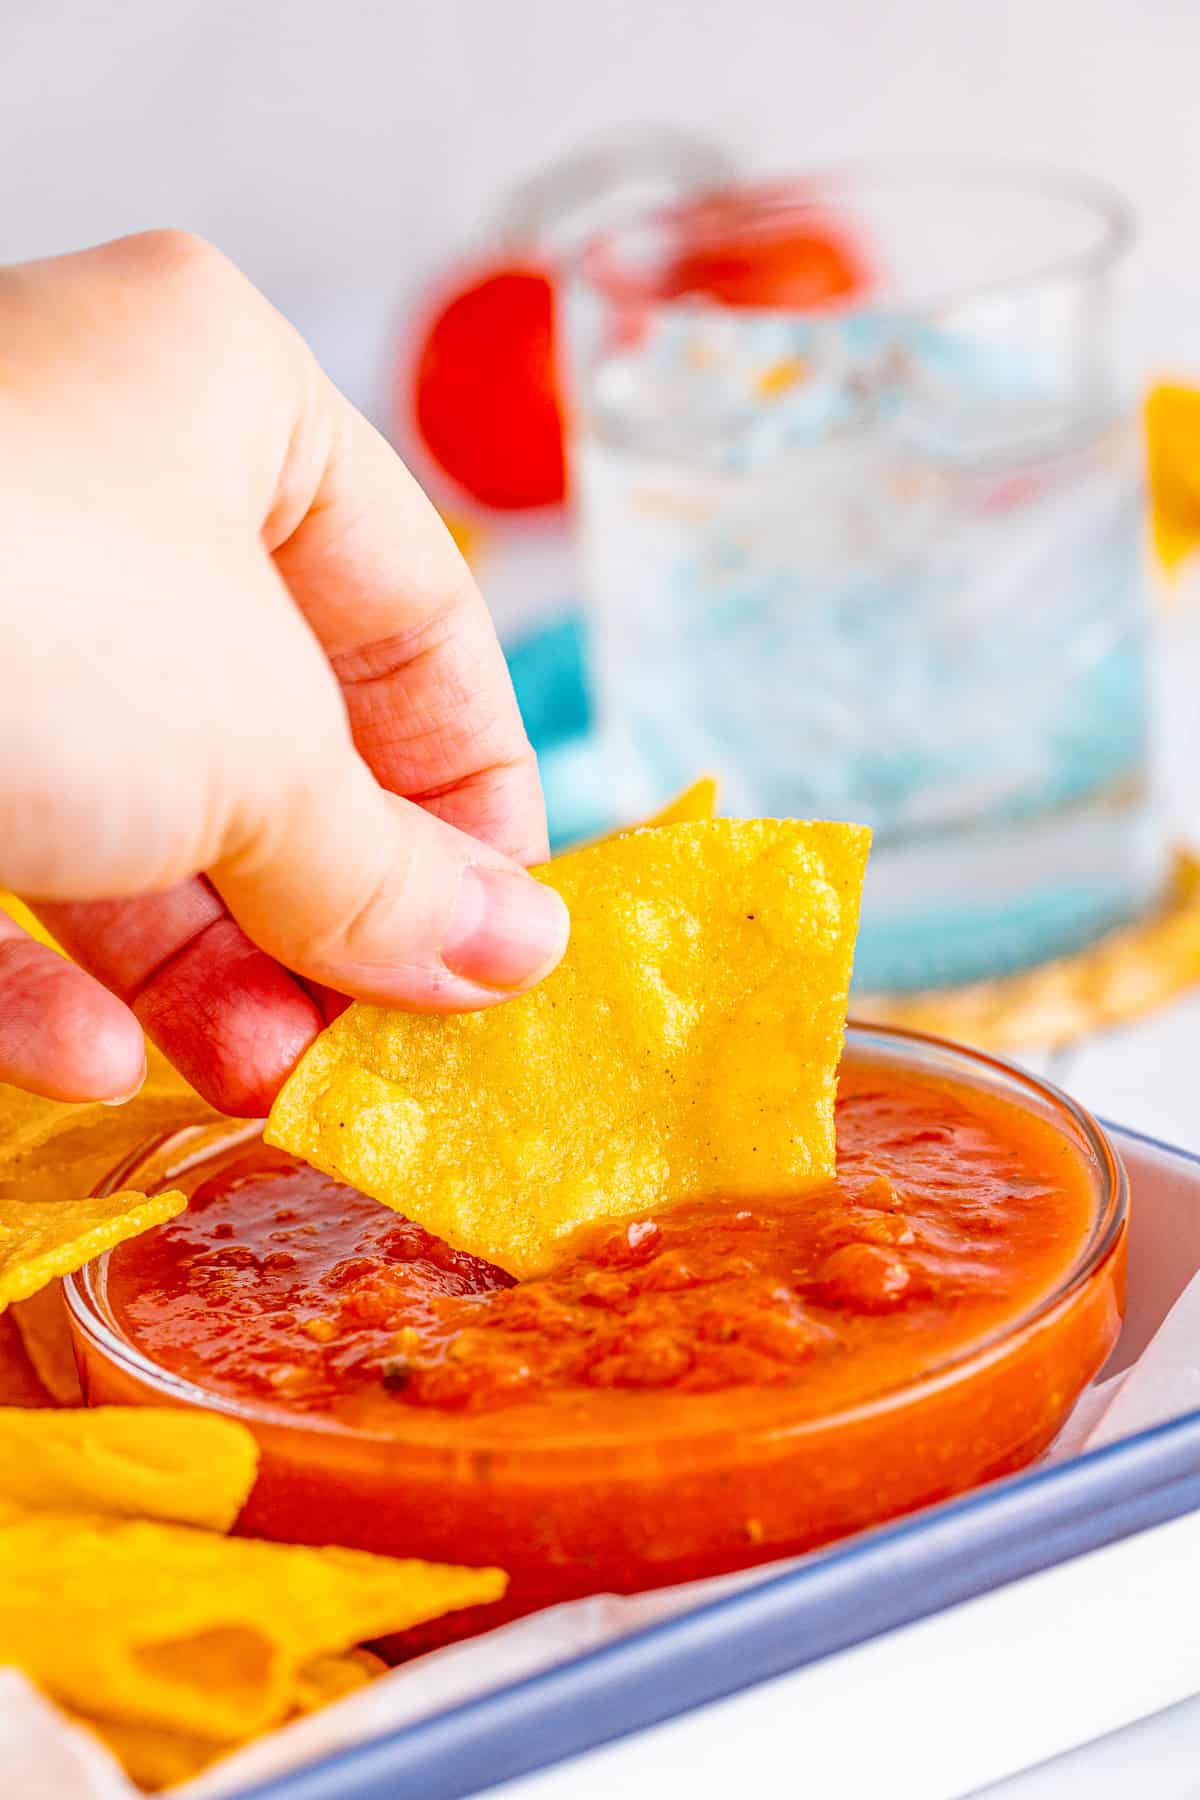 Hand dipping one chip into salsa in a bowl.